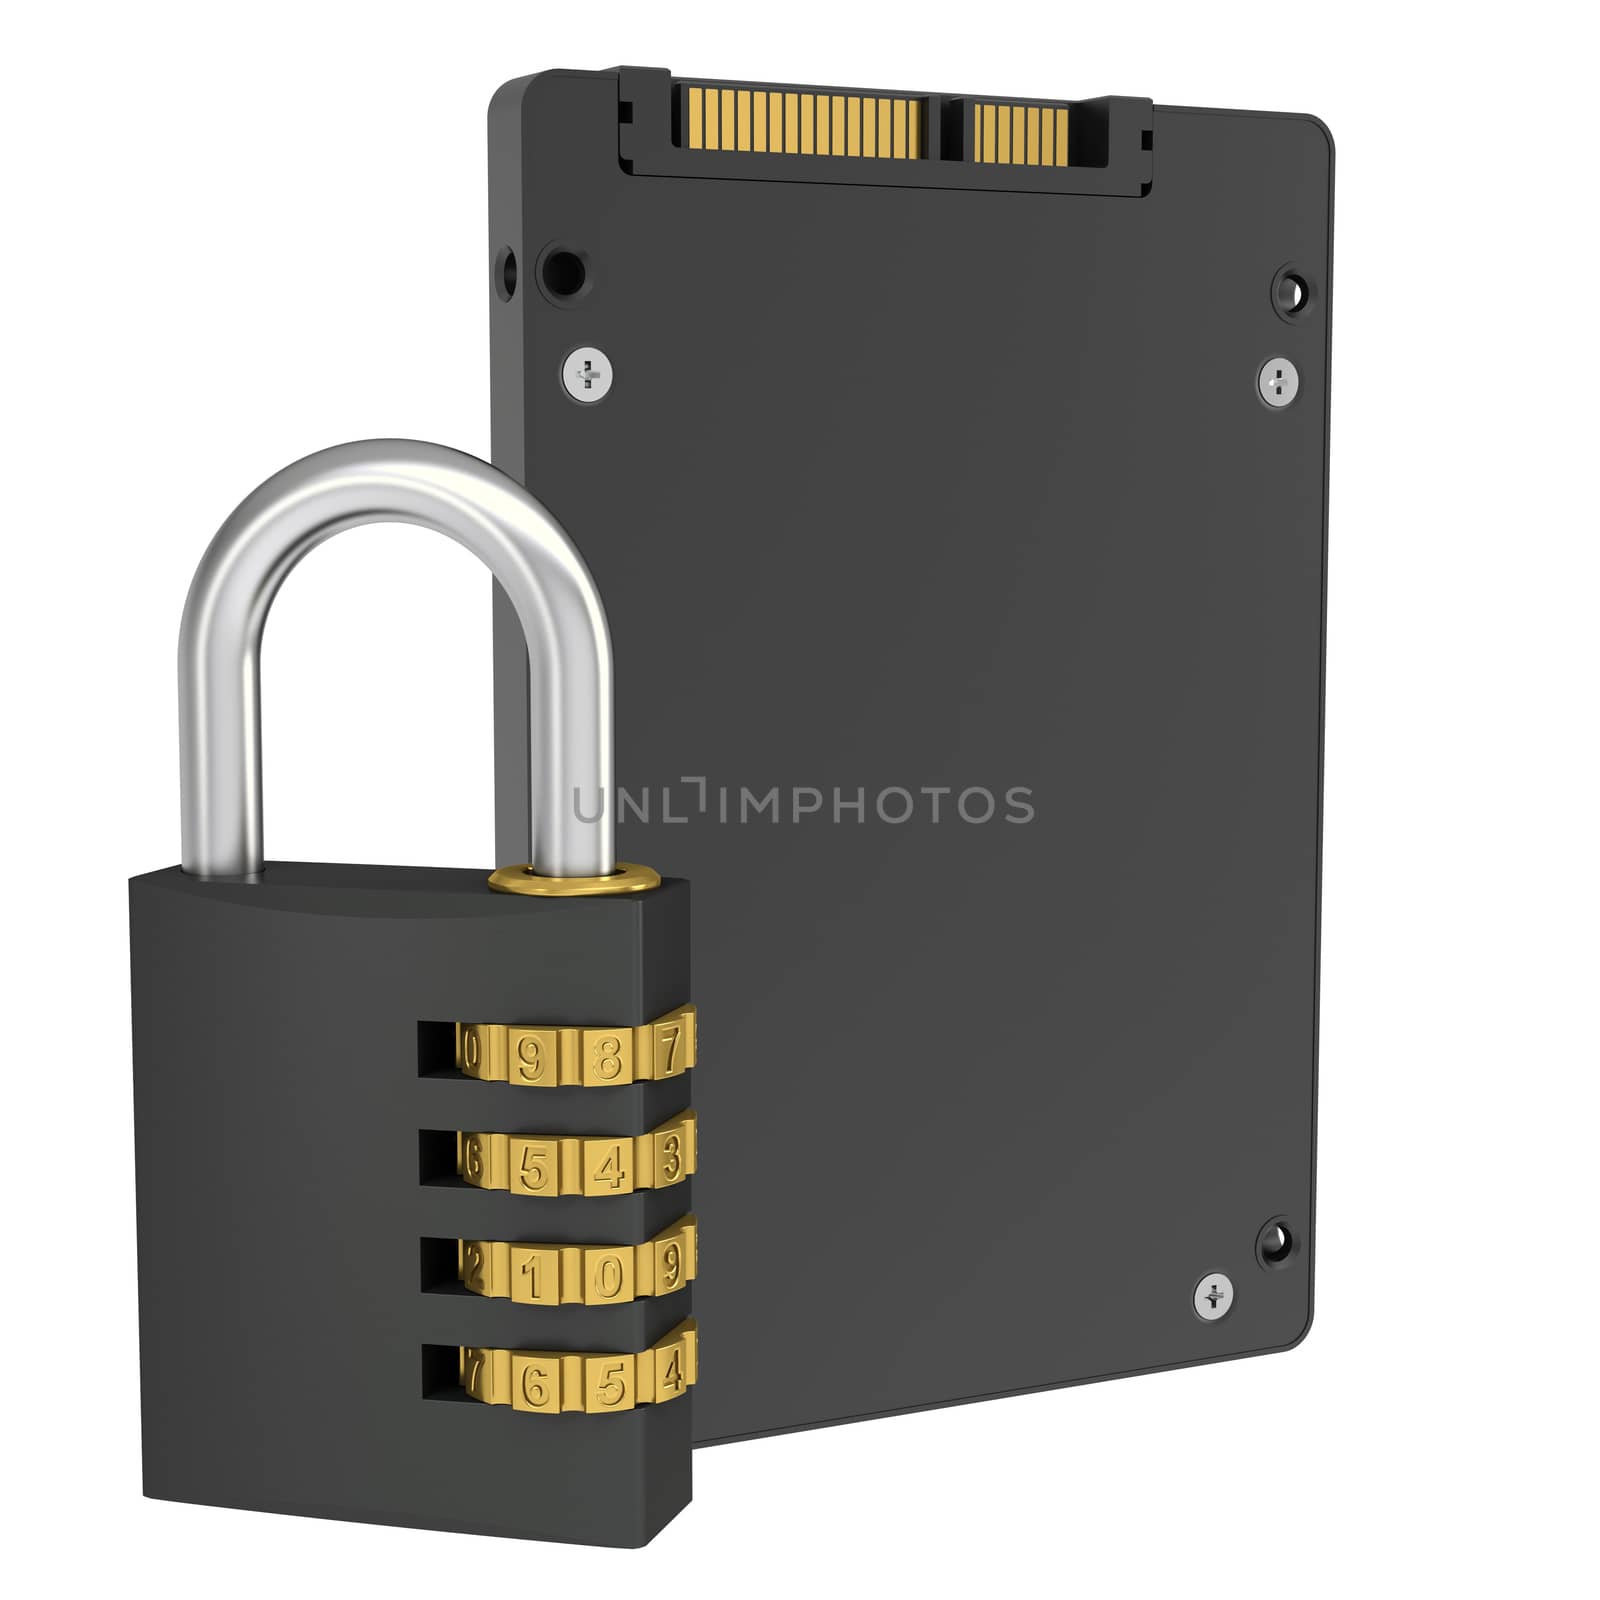 Solid State Drive and combination lock by cherezoff